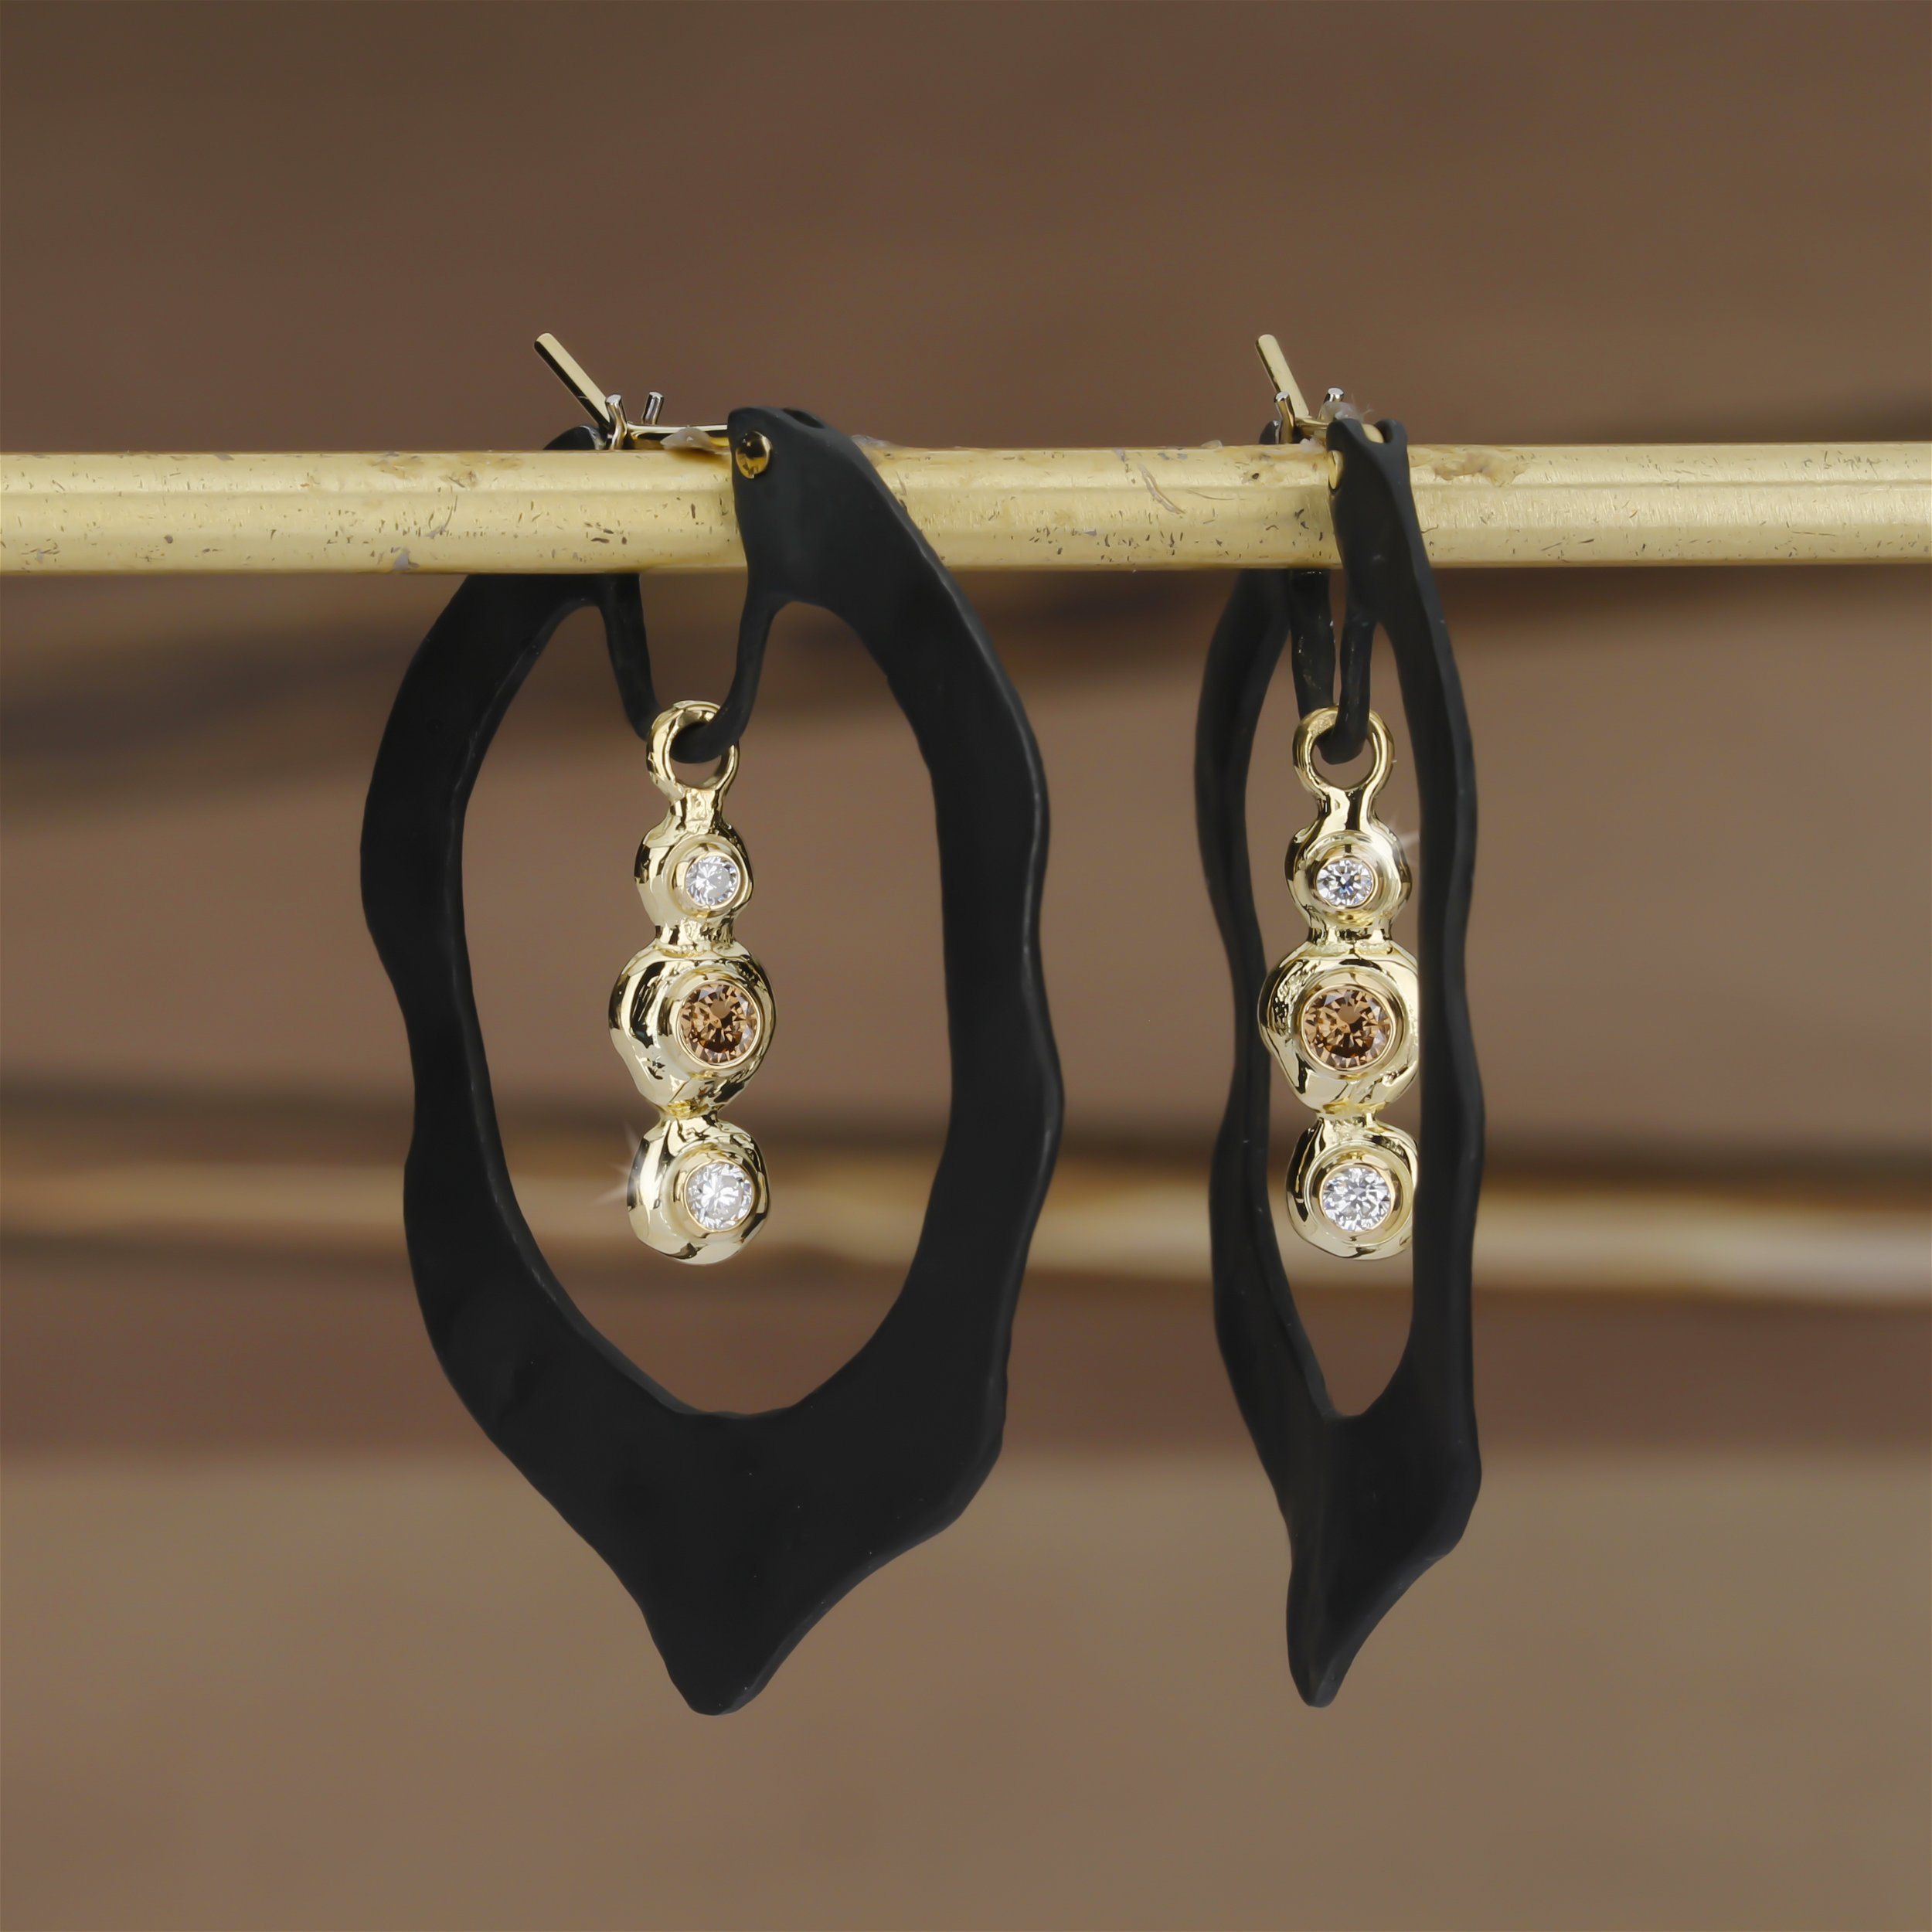 Jacaranda Dangle Hoop Earrings with White and Cognac Diamonds in Black Chrome and 18kt Yellow Gold